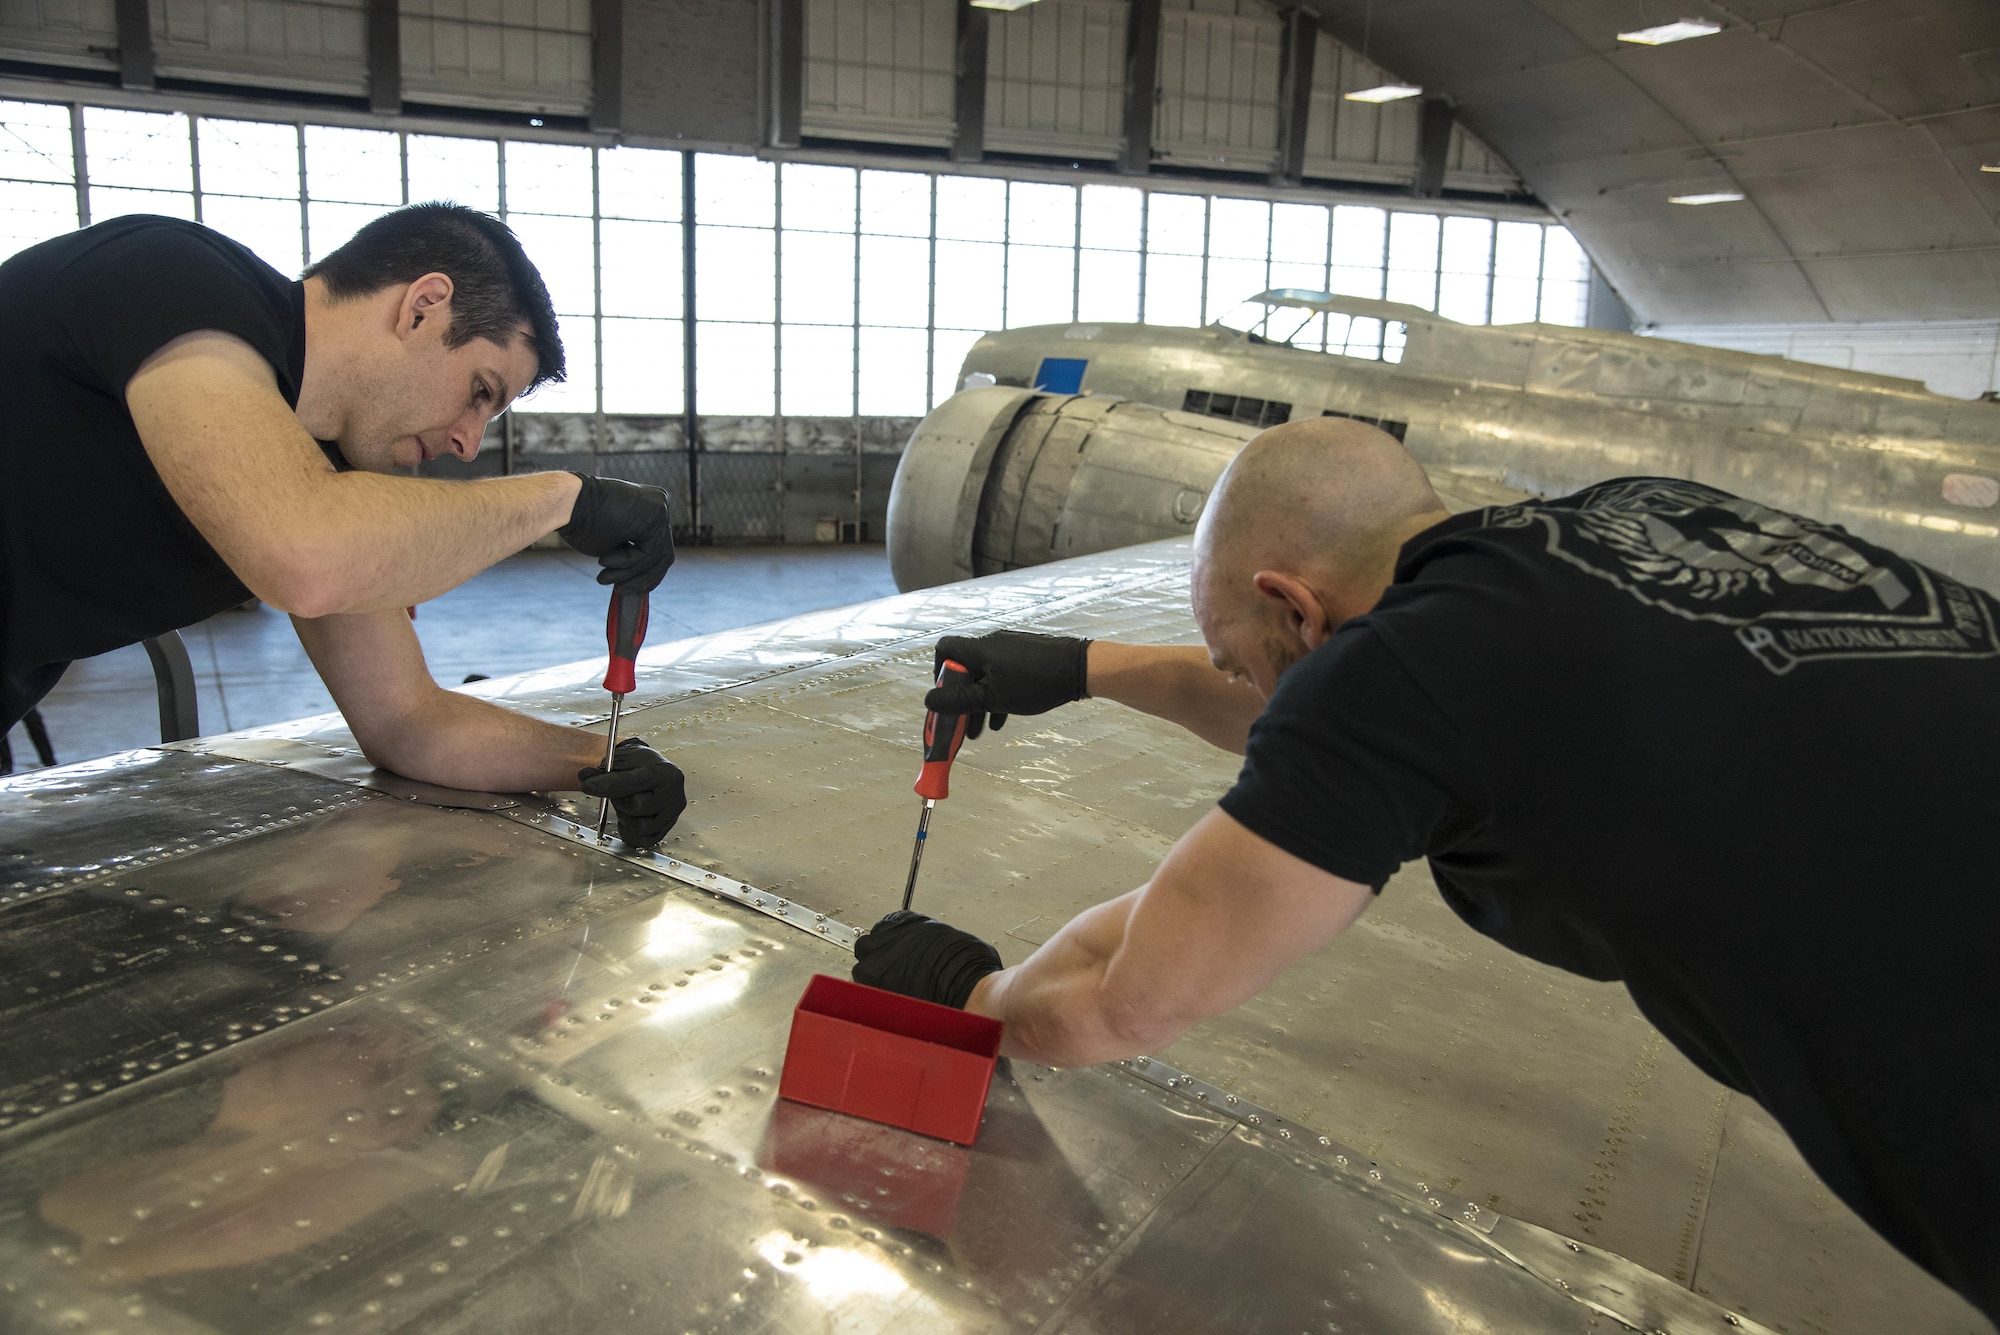 DAYTON, Ohio -- (From left to right) National Museum of the U.S. Air Force restoration specialists Casey Simmons and Chase Meredith install the final wing-tip on the Boeing B-17F Memphis Belle™ on March 22, 2017. The famed B-17F Memphis Belle™ and its crew became iconic symbols of the heavy bomber crews and support personnel who helped defeat Nazi Germany. The Memphis Belle was the first US Army Air Forces heavy bomber to return to the US after completing 25 combat missions over Europe. The USAAF chose the Memphis Belle for a highly-publicized war bond tour from June-August 1943, and its crew was celebrated as national heroes. The aircraft and crew were also the subject of two widely-seen Hollywood movies (one in 1944 and another in 1990). The Memphis Belle will be placed on public display at the museum on May 17, 2018. (U.S. Air Force photo by Ken LaRock)